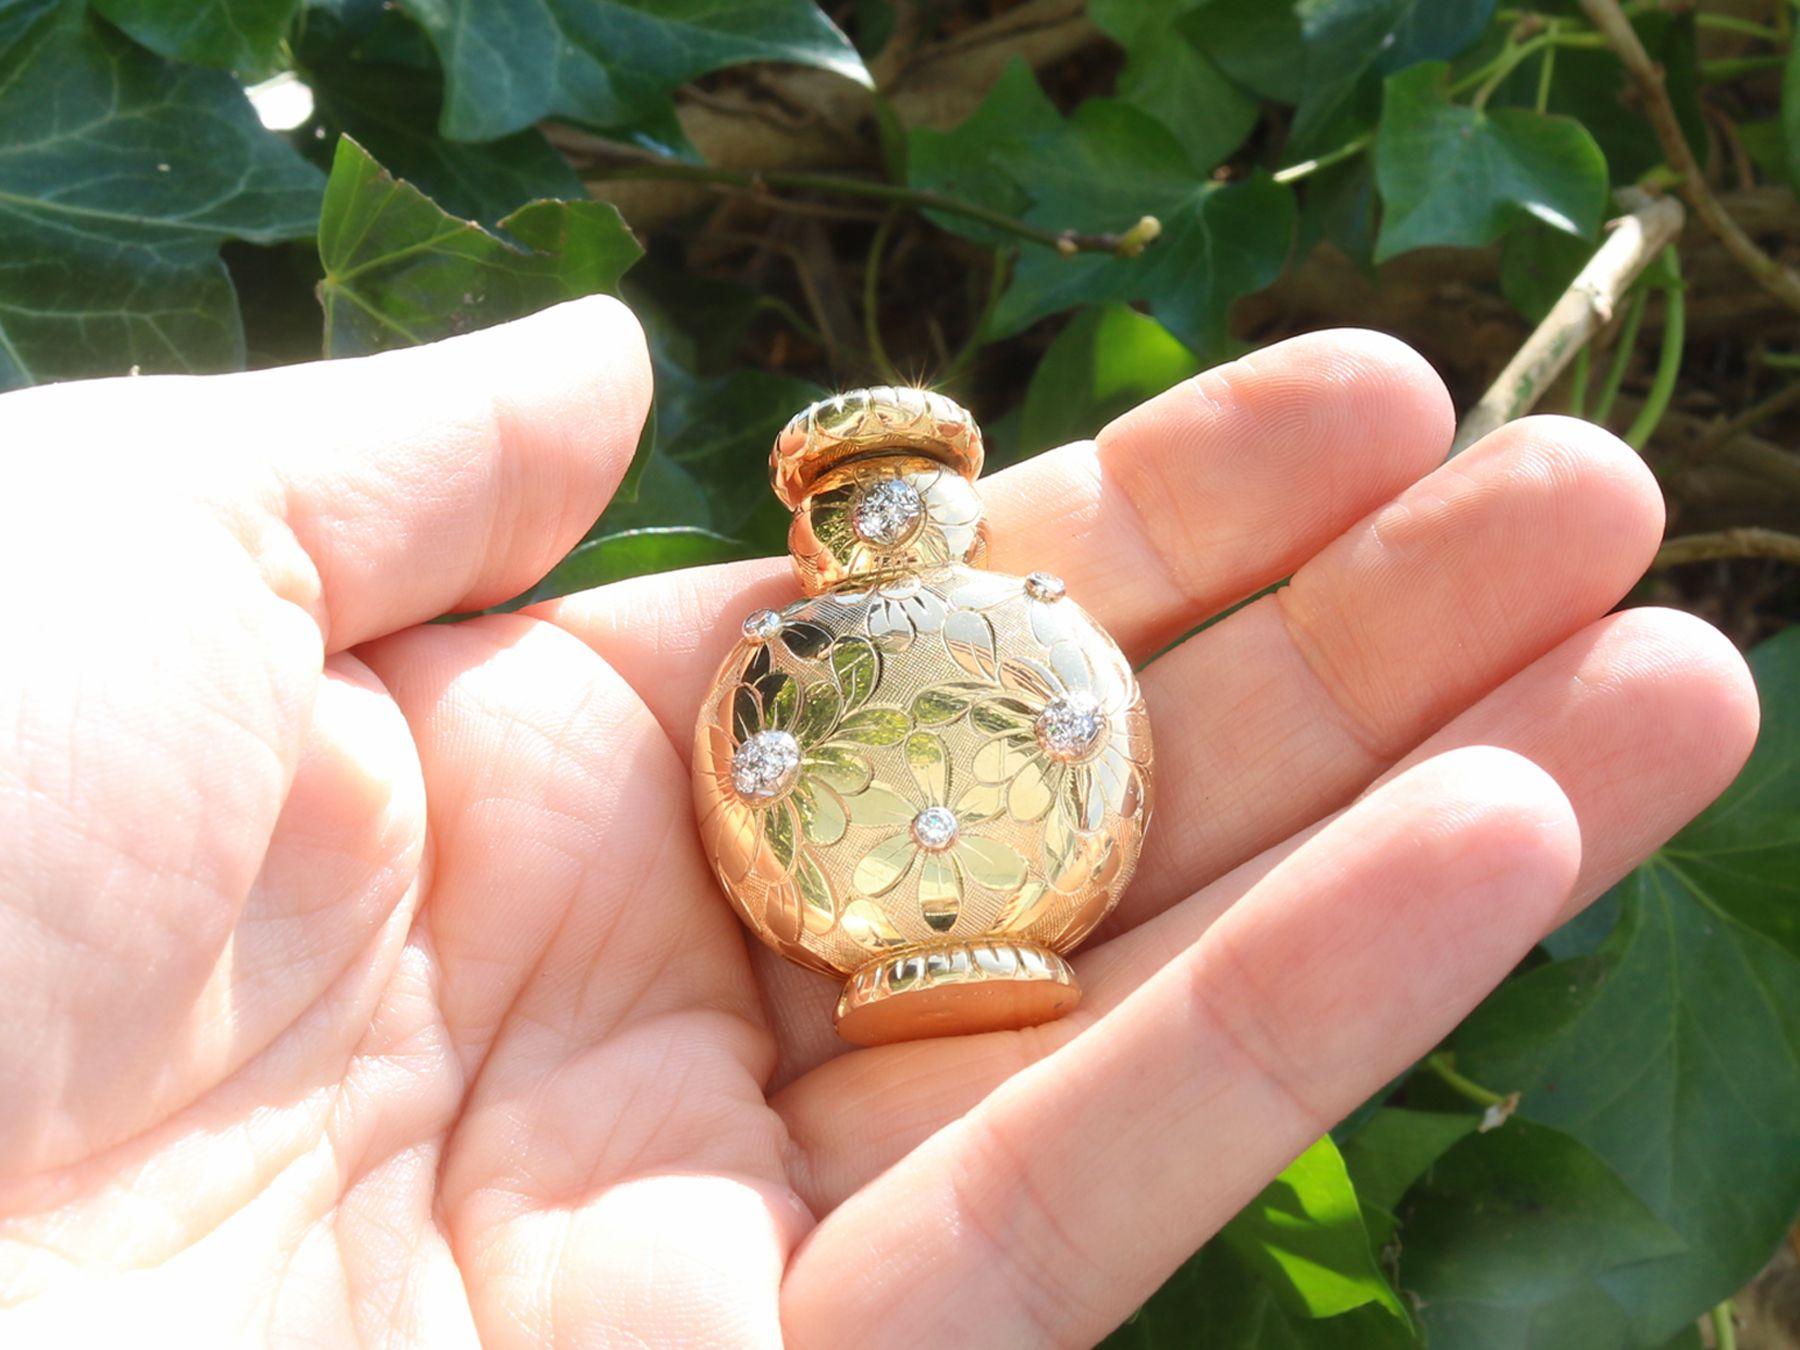 An exceptional, fine and impressive vintage French 18-karat yellow gold and platinum set diamond scent bottle by Van Cleef & Arpels; an addition to our diverse ornamental collection.

This exceptional vintage French 18-karat yellow gold scent